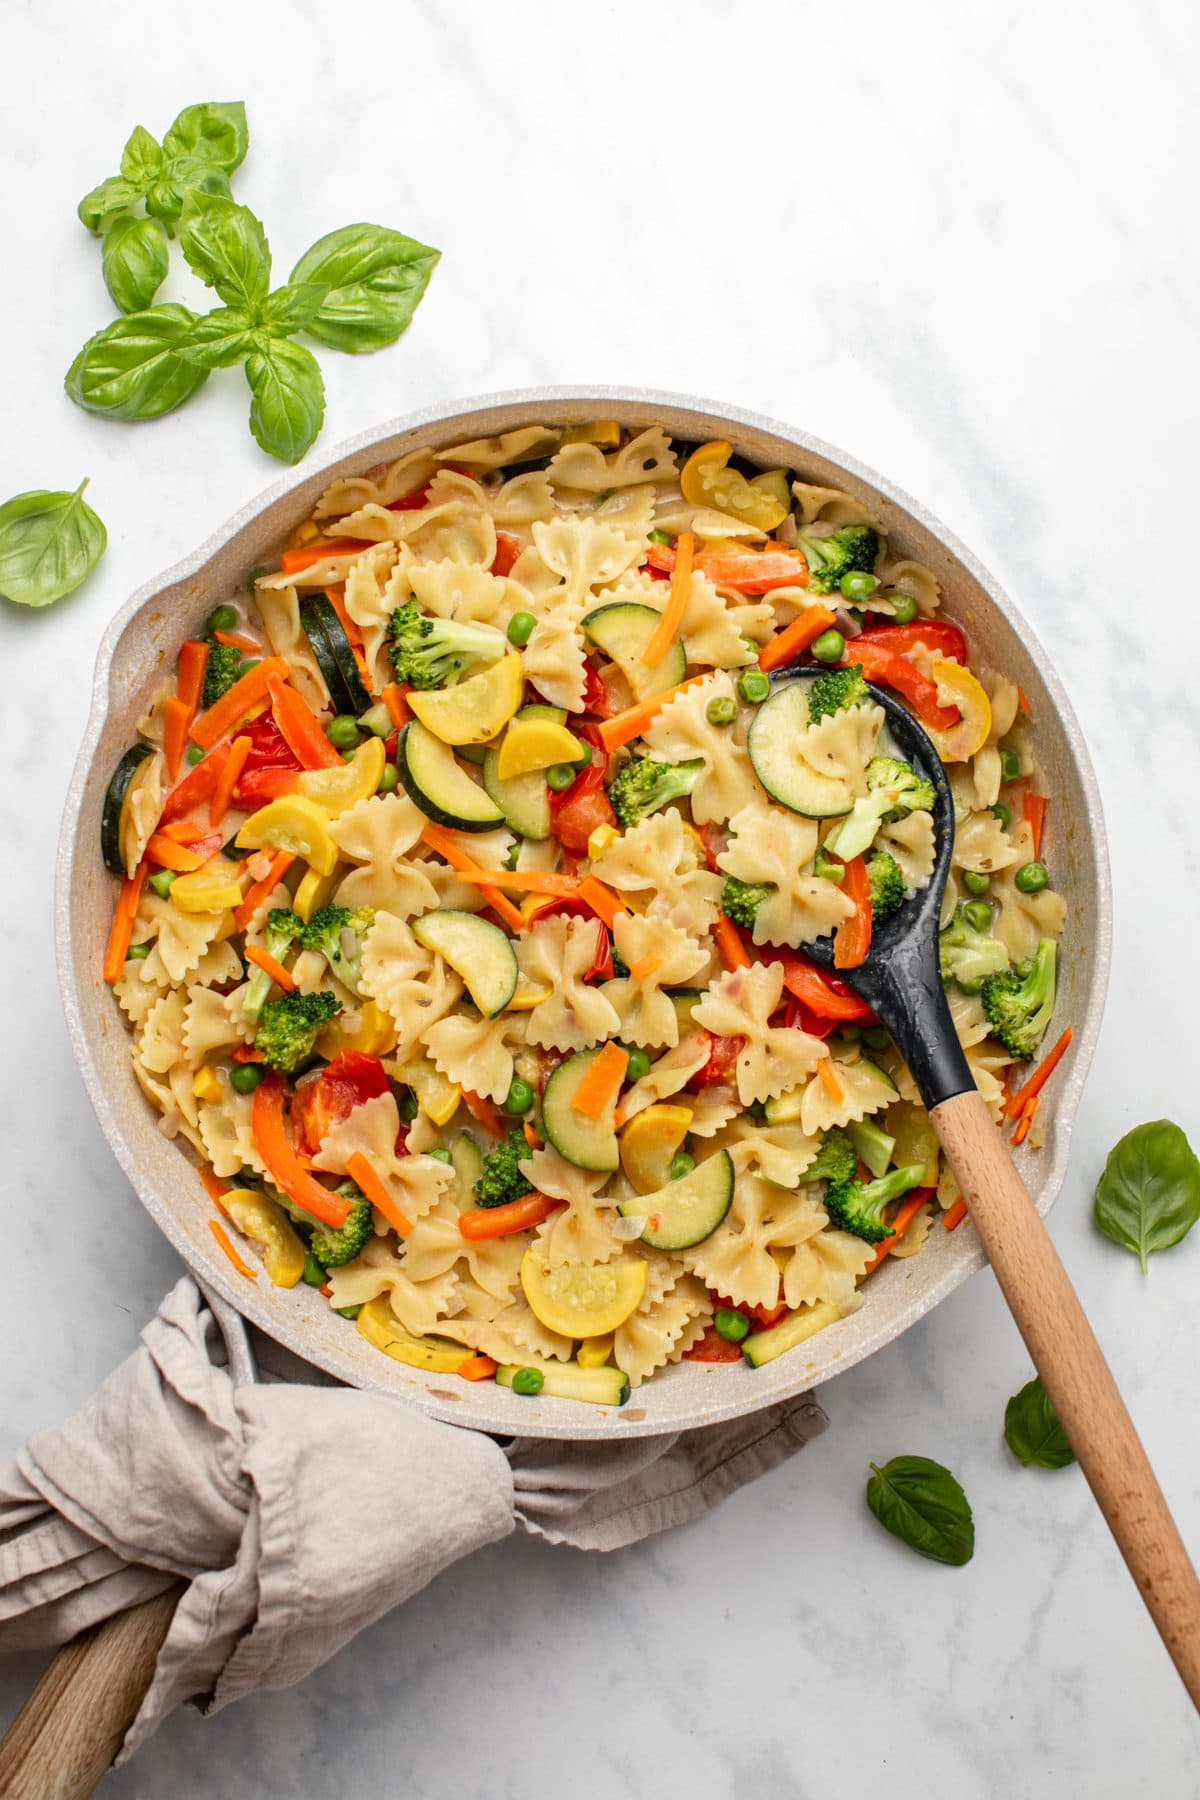 Large sauté pan of cooked pasta primavera with colorful vegetables, with fresh basil on the side